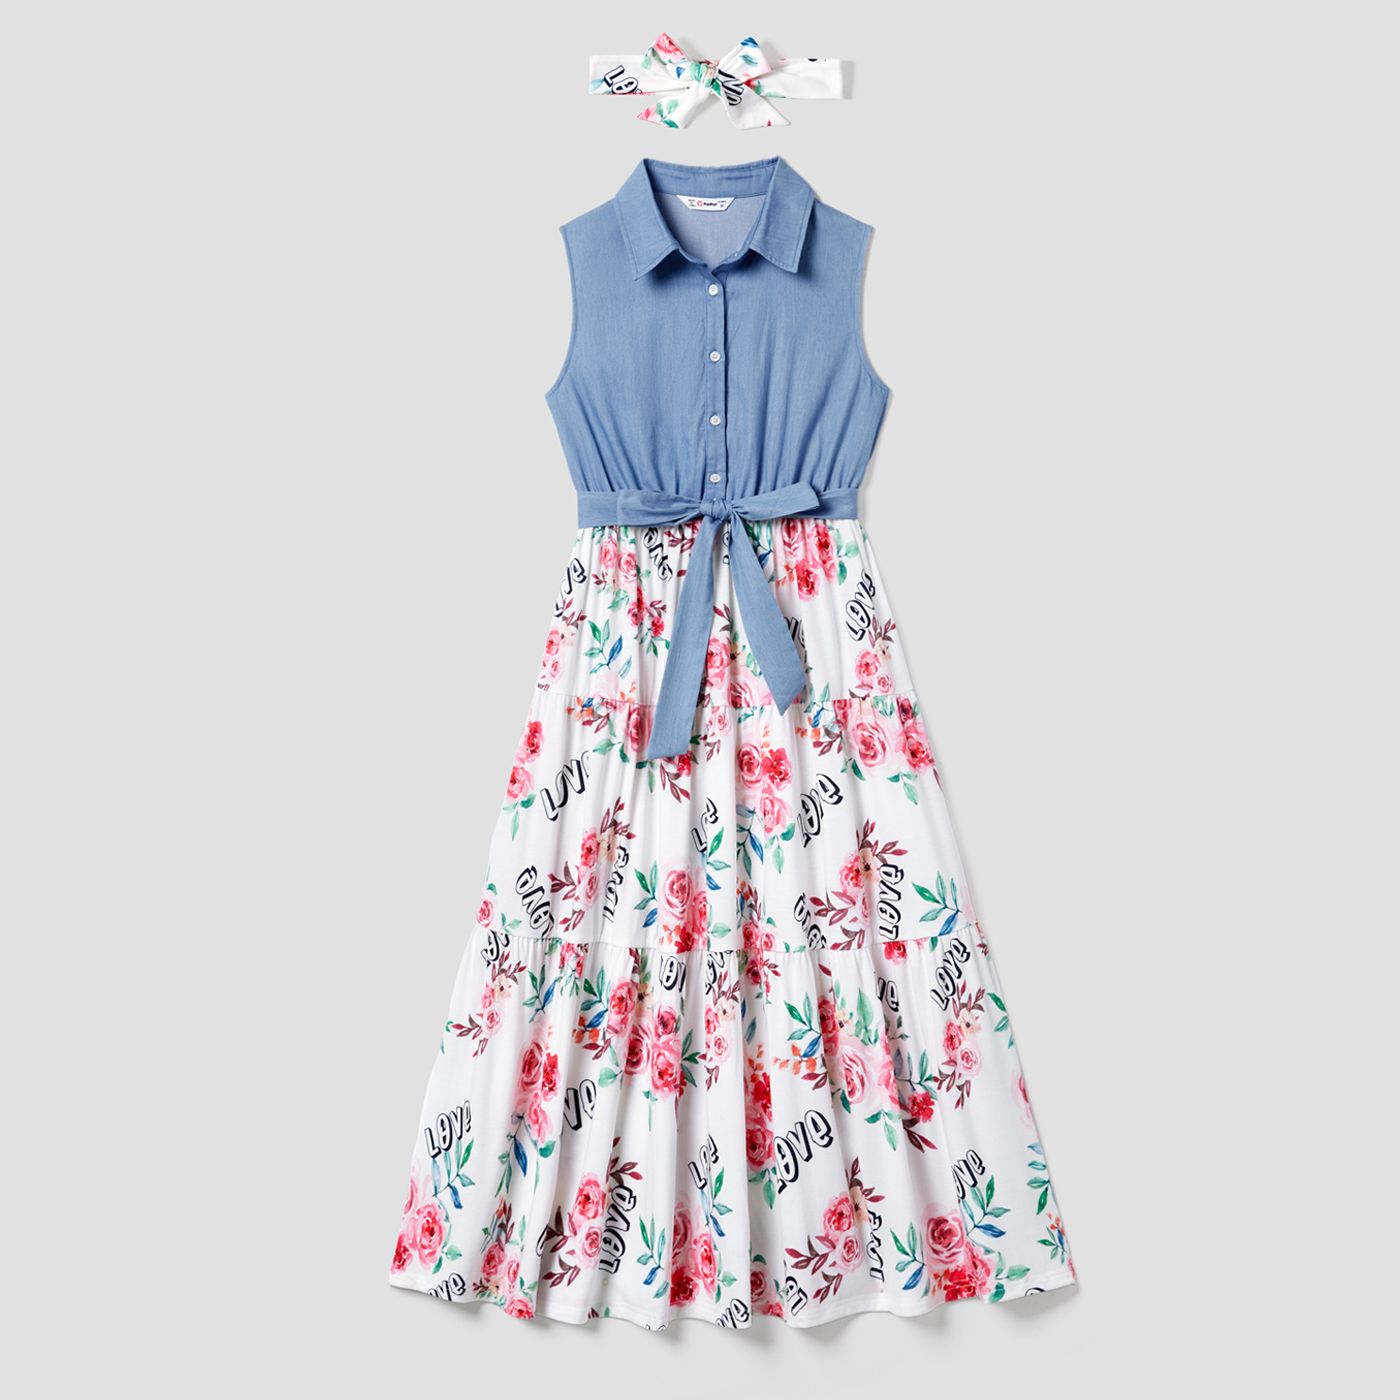 Family Matching Letter and Floral Print Splicing Denim Blue Bow Belted Sleeveless Dresses with Headb